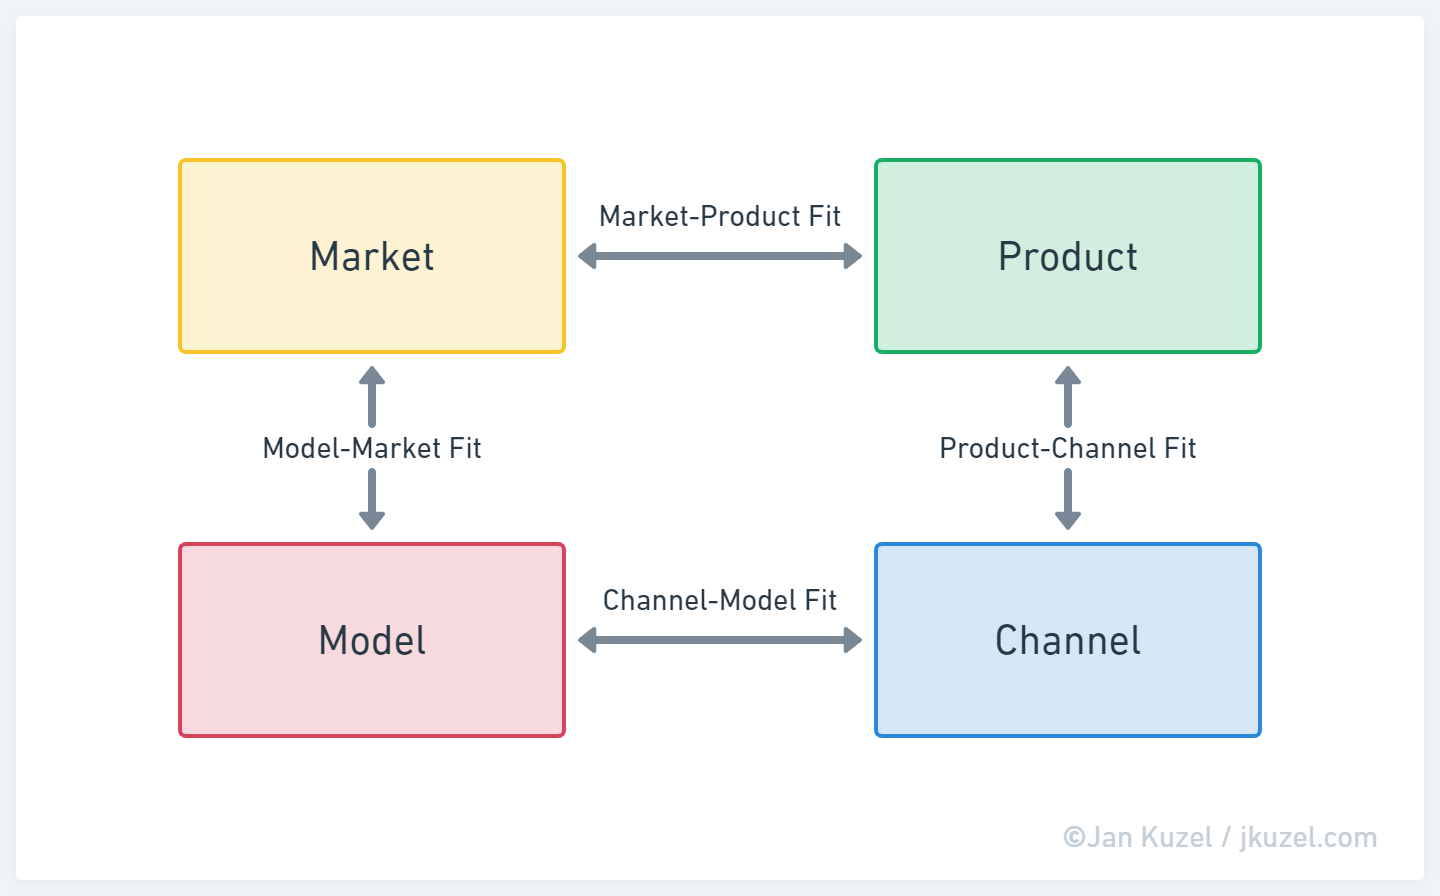 The Four Fits: Why Building a Great SaaS Product Isn’t Enough